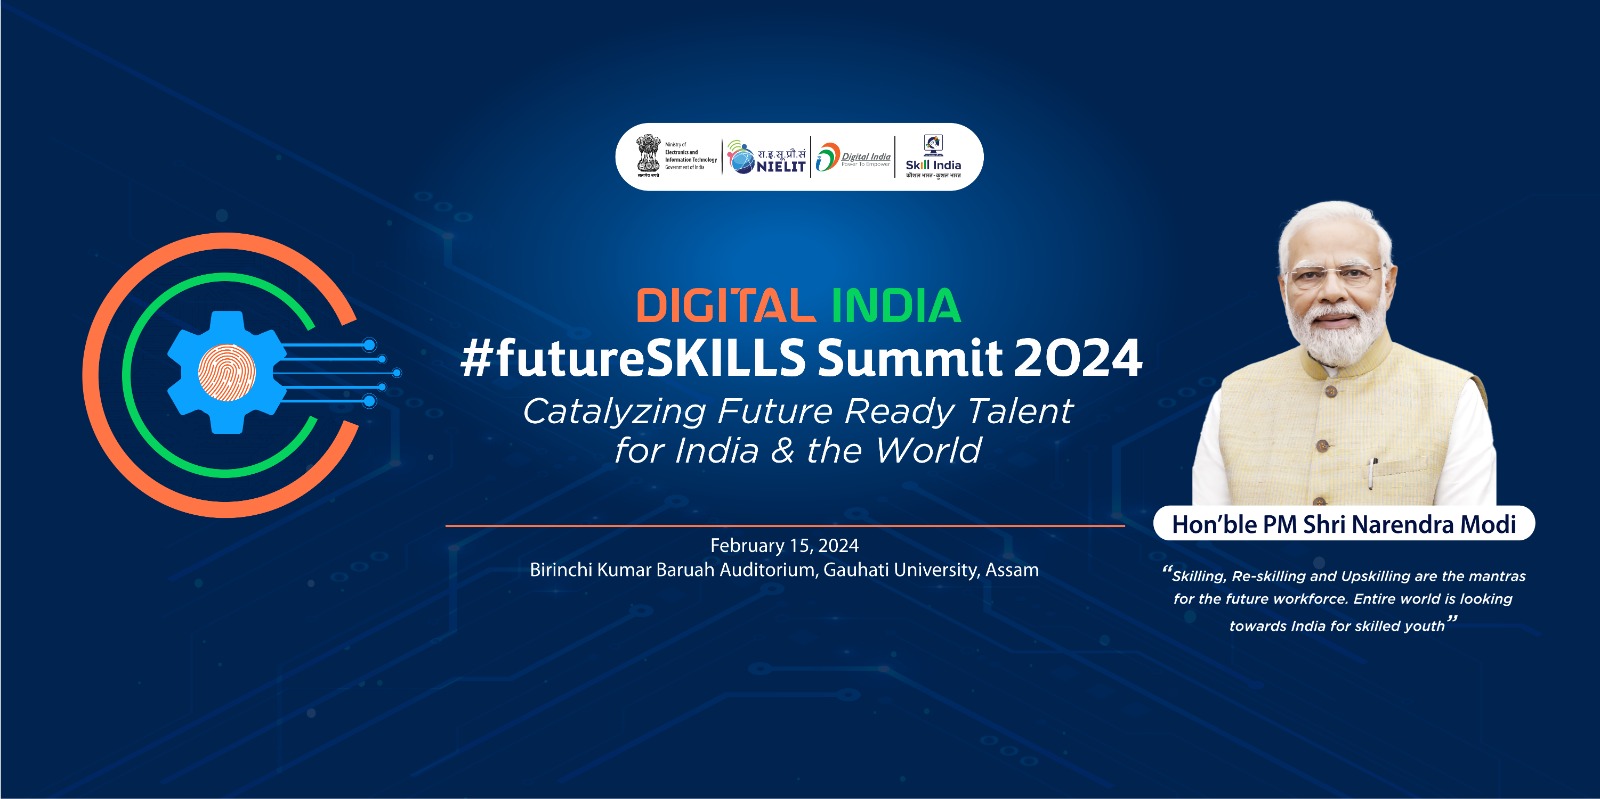 Ministry of Electronics & IT to hold first-ever Digital India futureSKILLS summit in Guwahati on Thursday